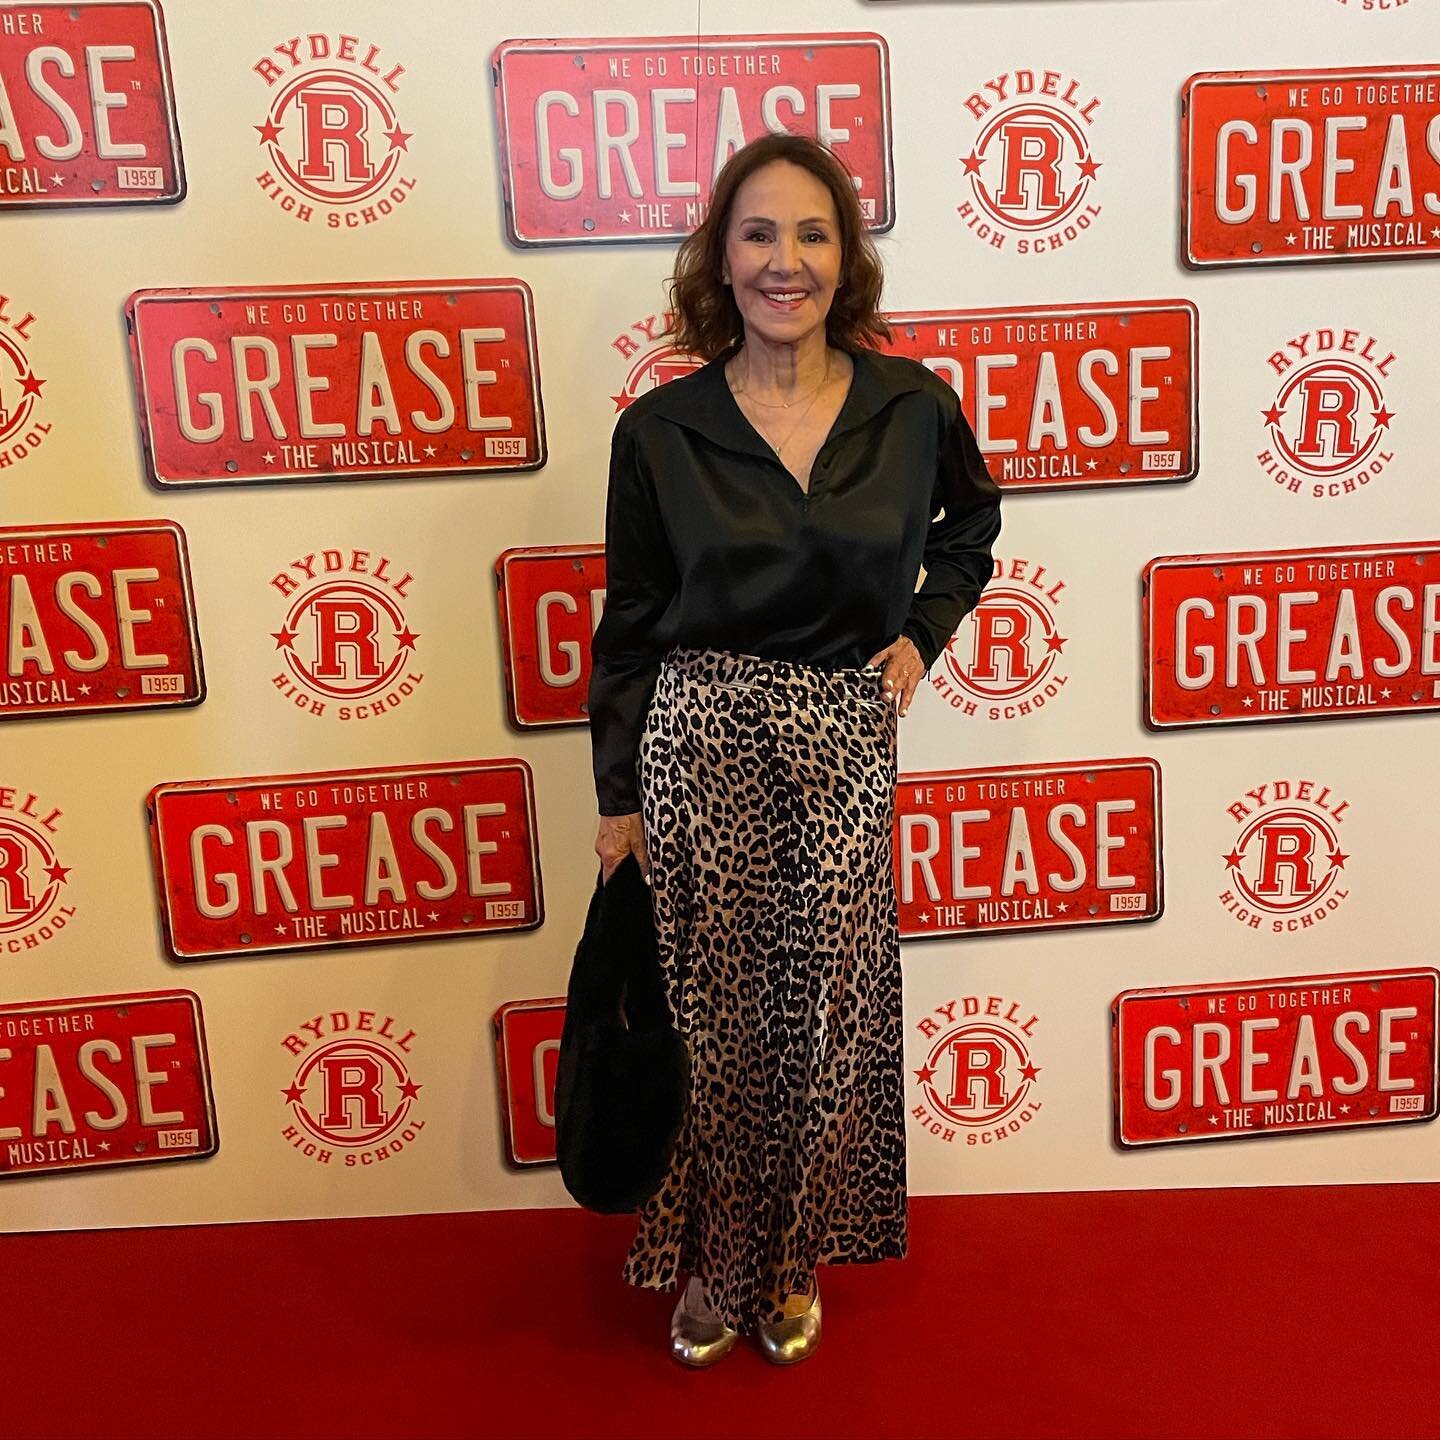 After a lovely long weekend it&rsquo;s back to work and starting rehearsals on @greasewestend return to the glorious @dominiontheatre next month, when I&rsquo;ll be back on this red carpet and ready for the world to see our fabulous production once m